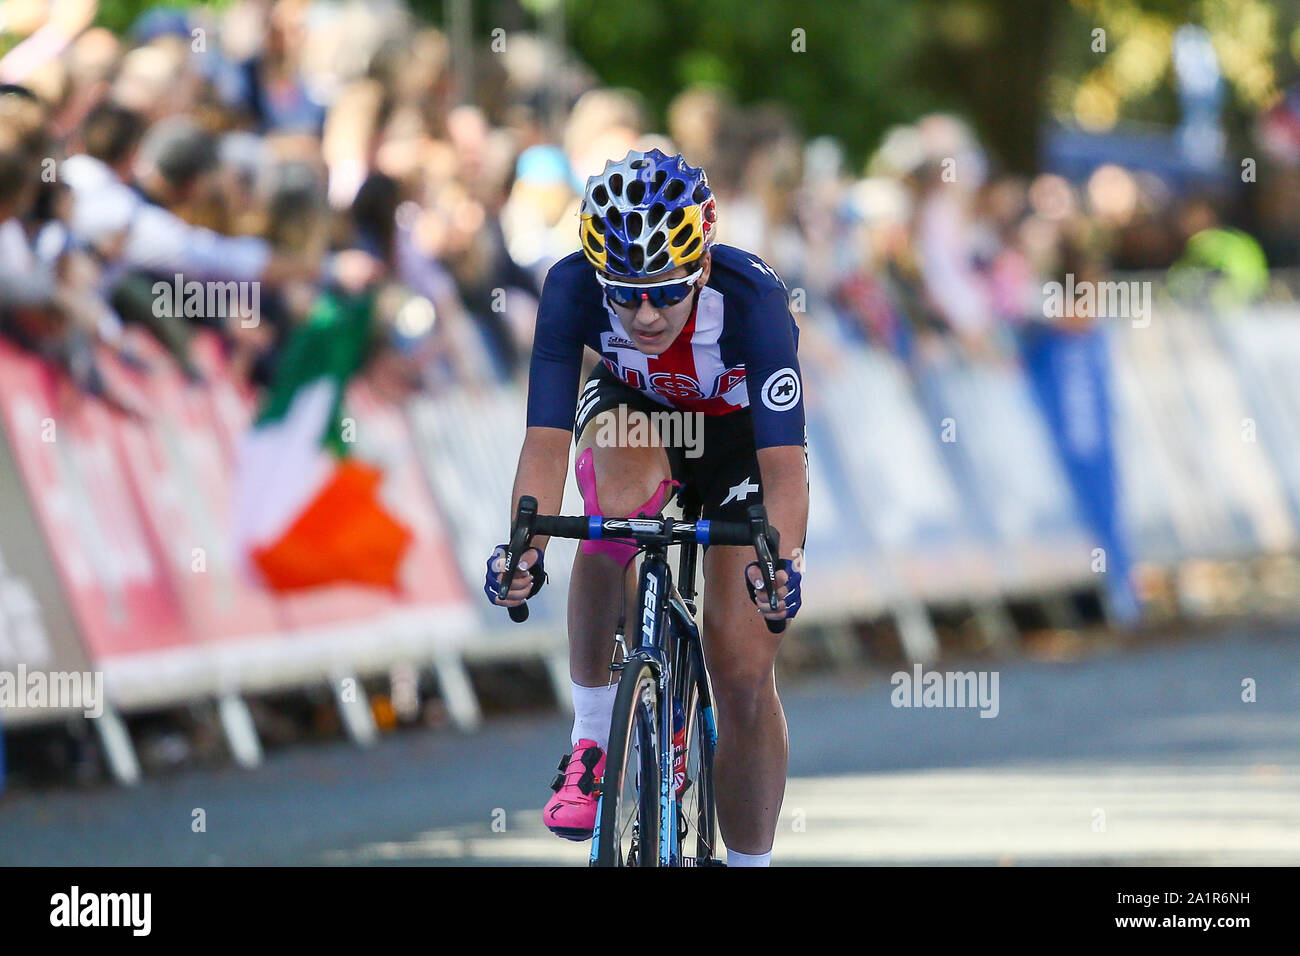 Harrogate, UK. 28th Sep, 2019. Chloe Dygert of the USA just misses out on  the podium in the 2019 UCI Road World Championships Womens Elite Road Race.  September 28, 2019 Credit Dan-Cooke/Alamy